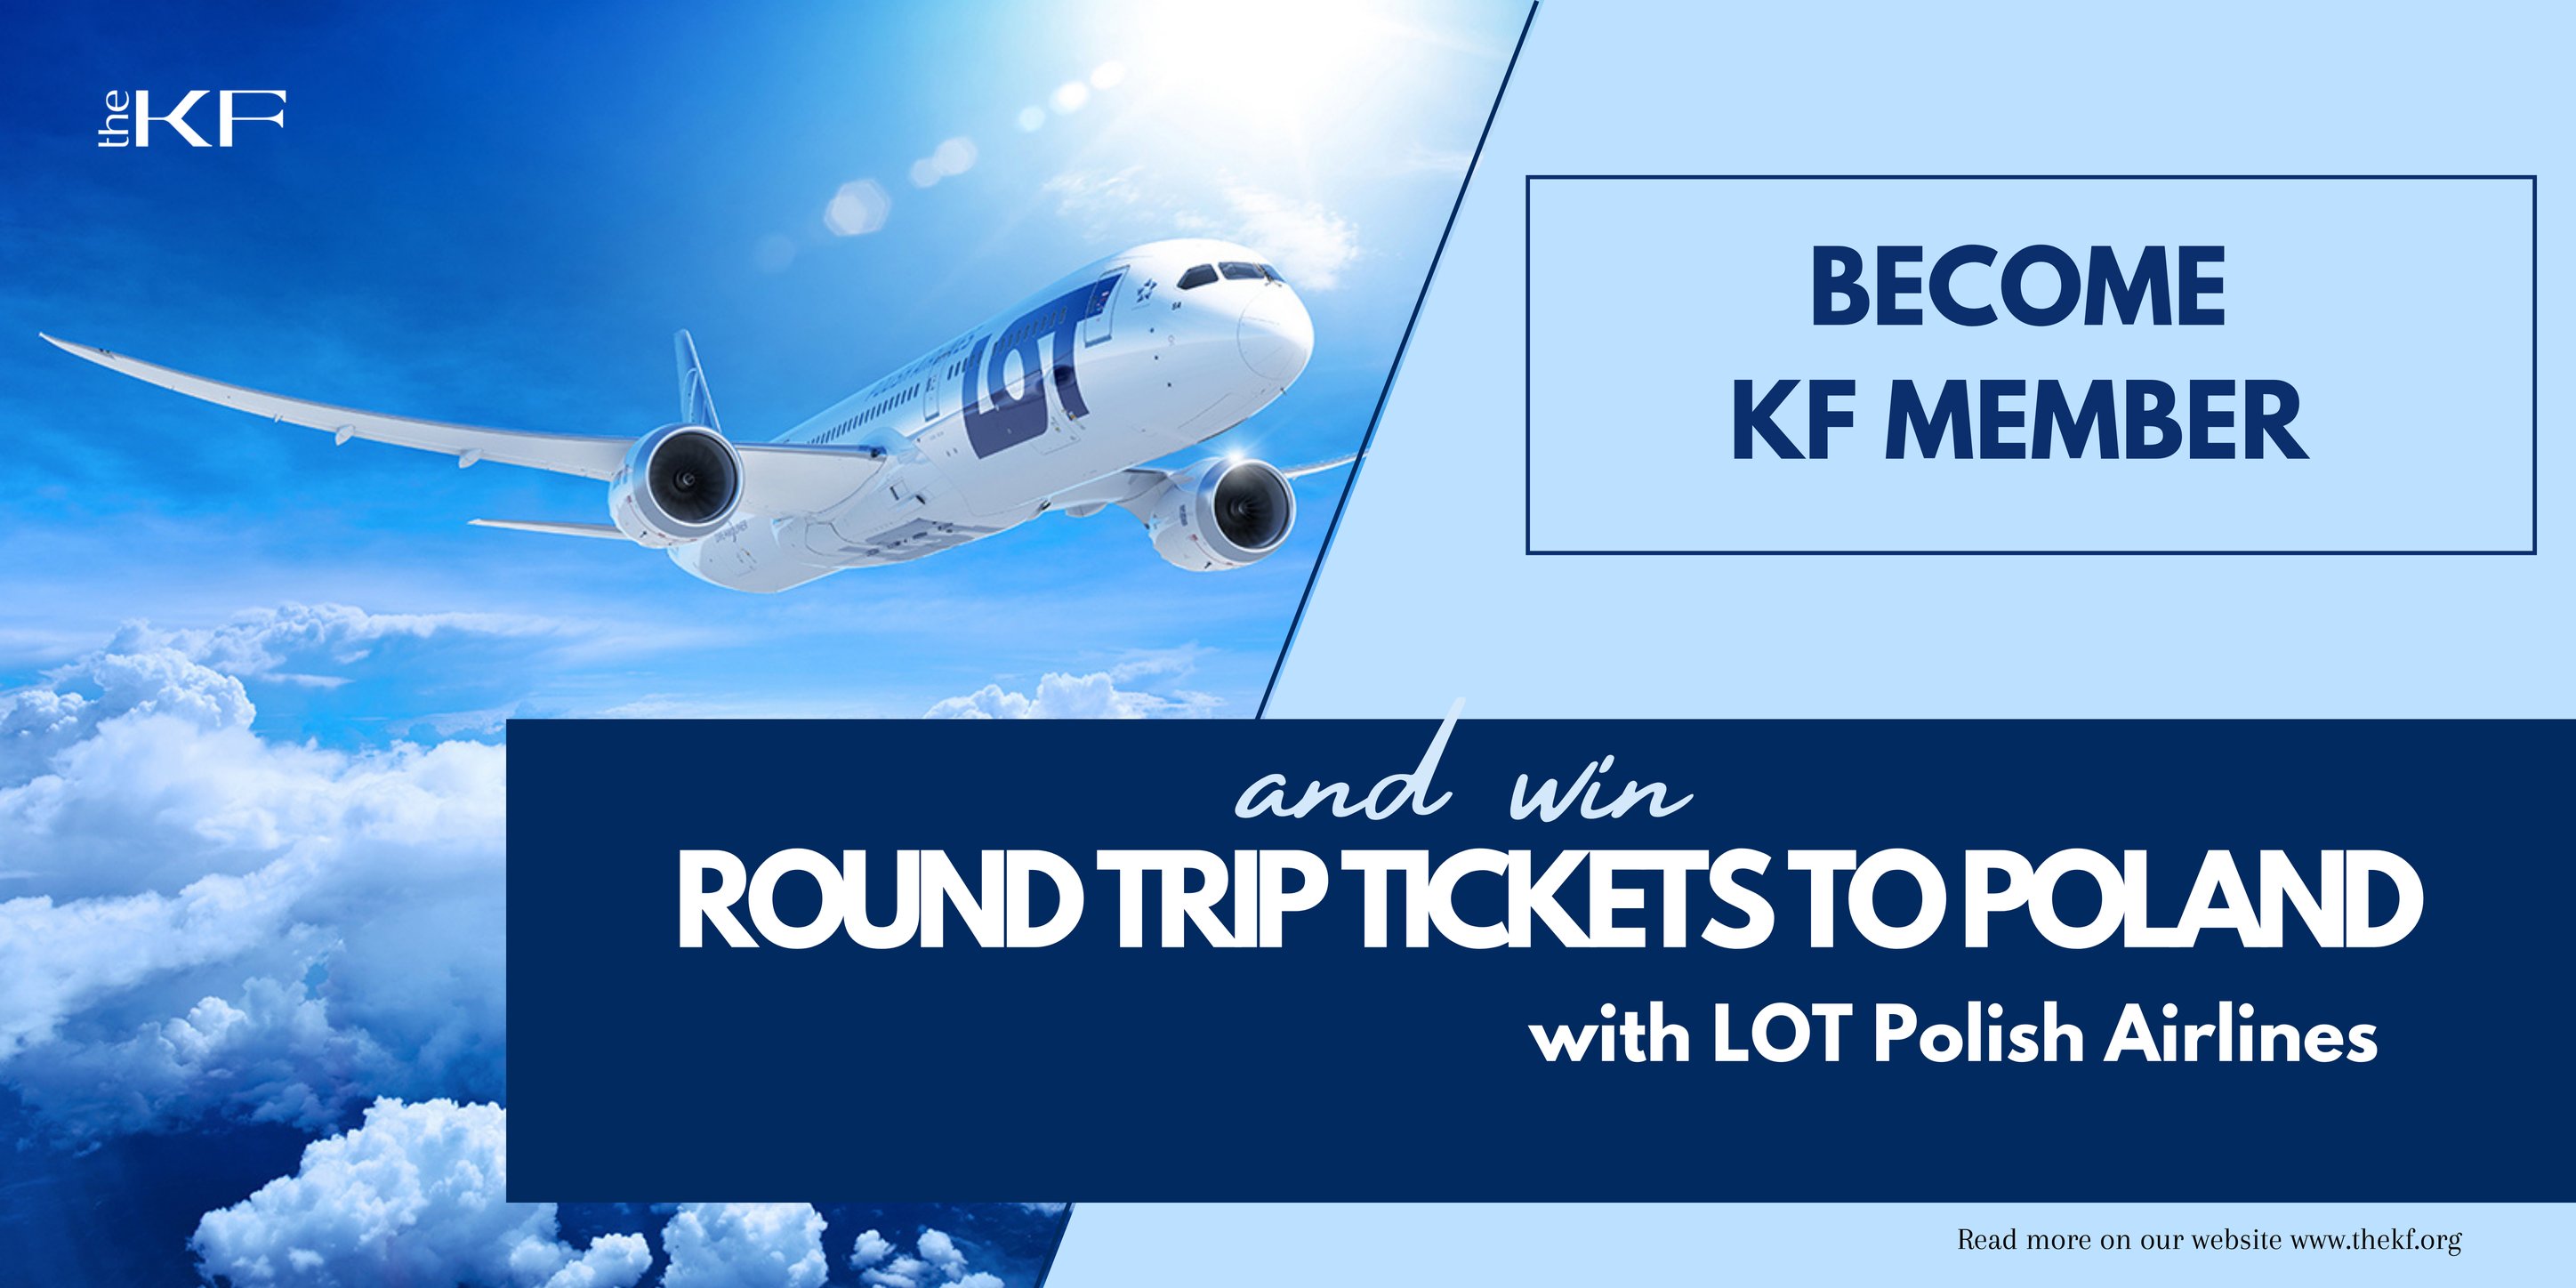 Become KF Member and Win Round Trip Tickets to Poland with LOT Polish Airlines